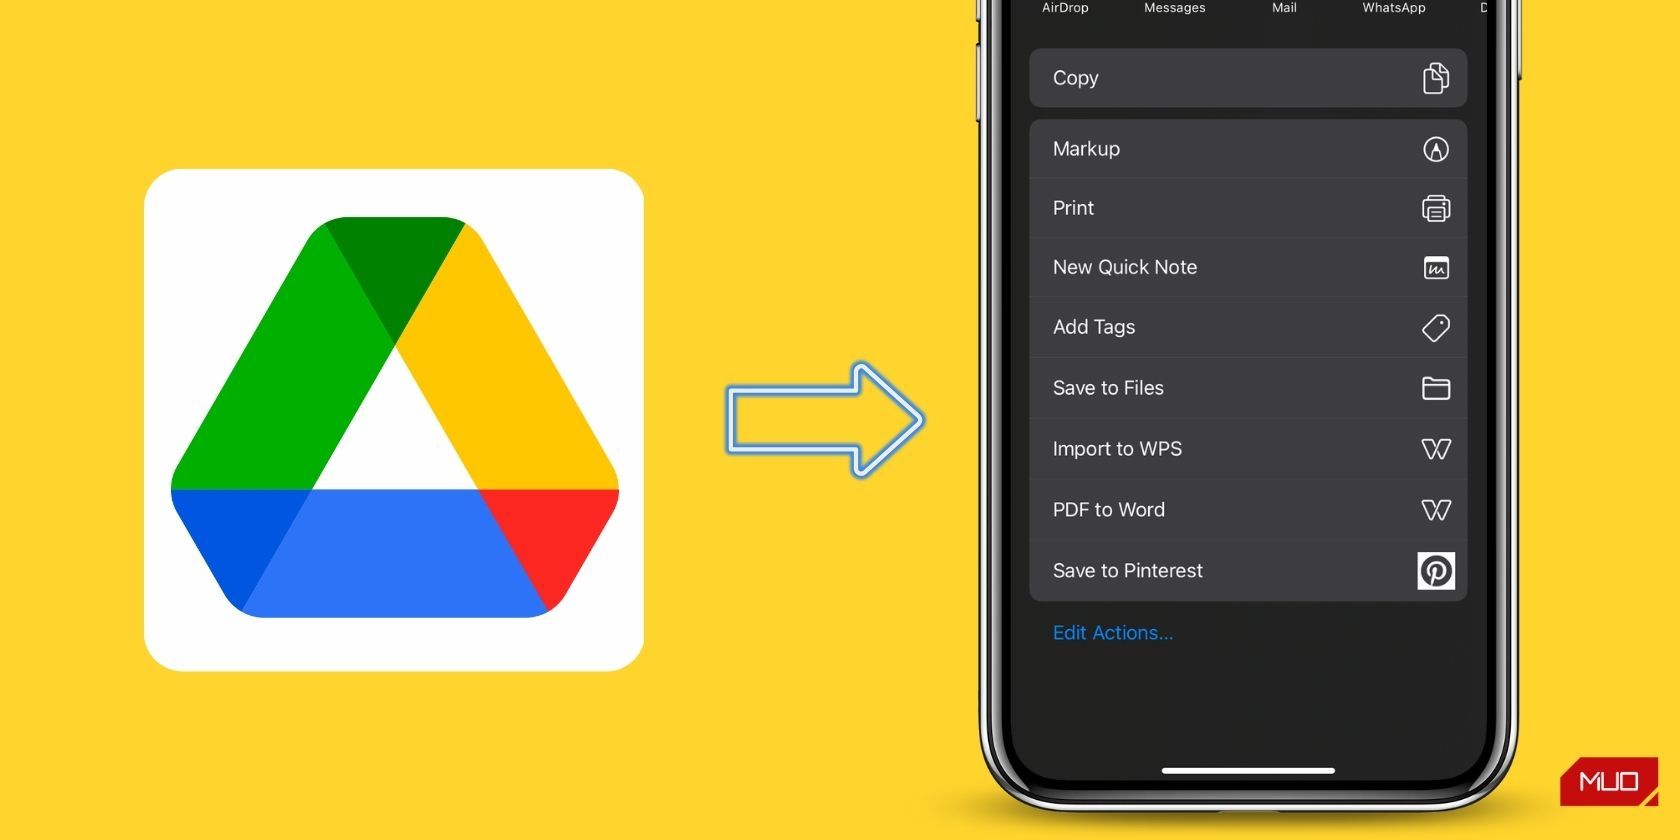 Transfer Files From Google Drive to iPhone